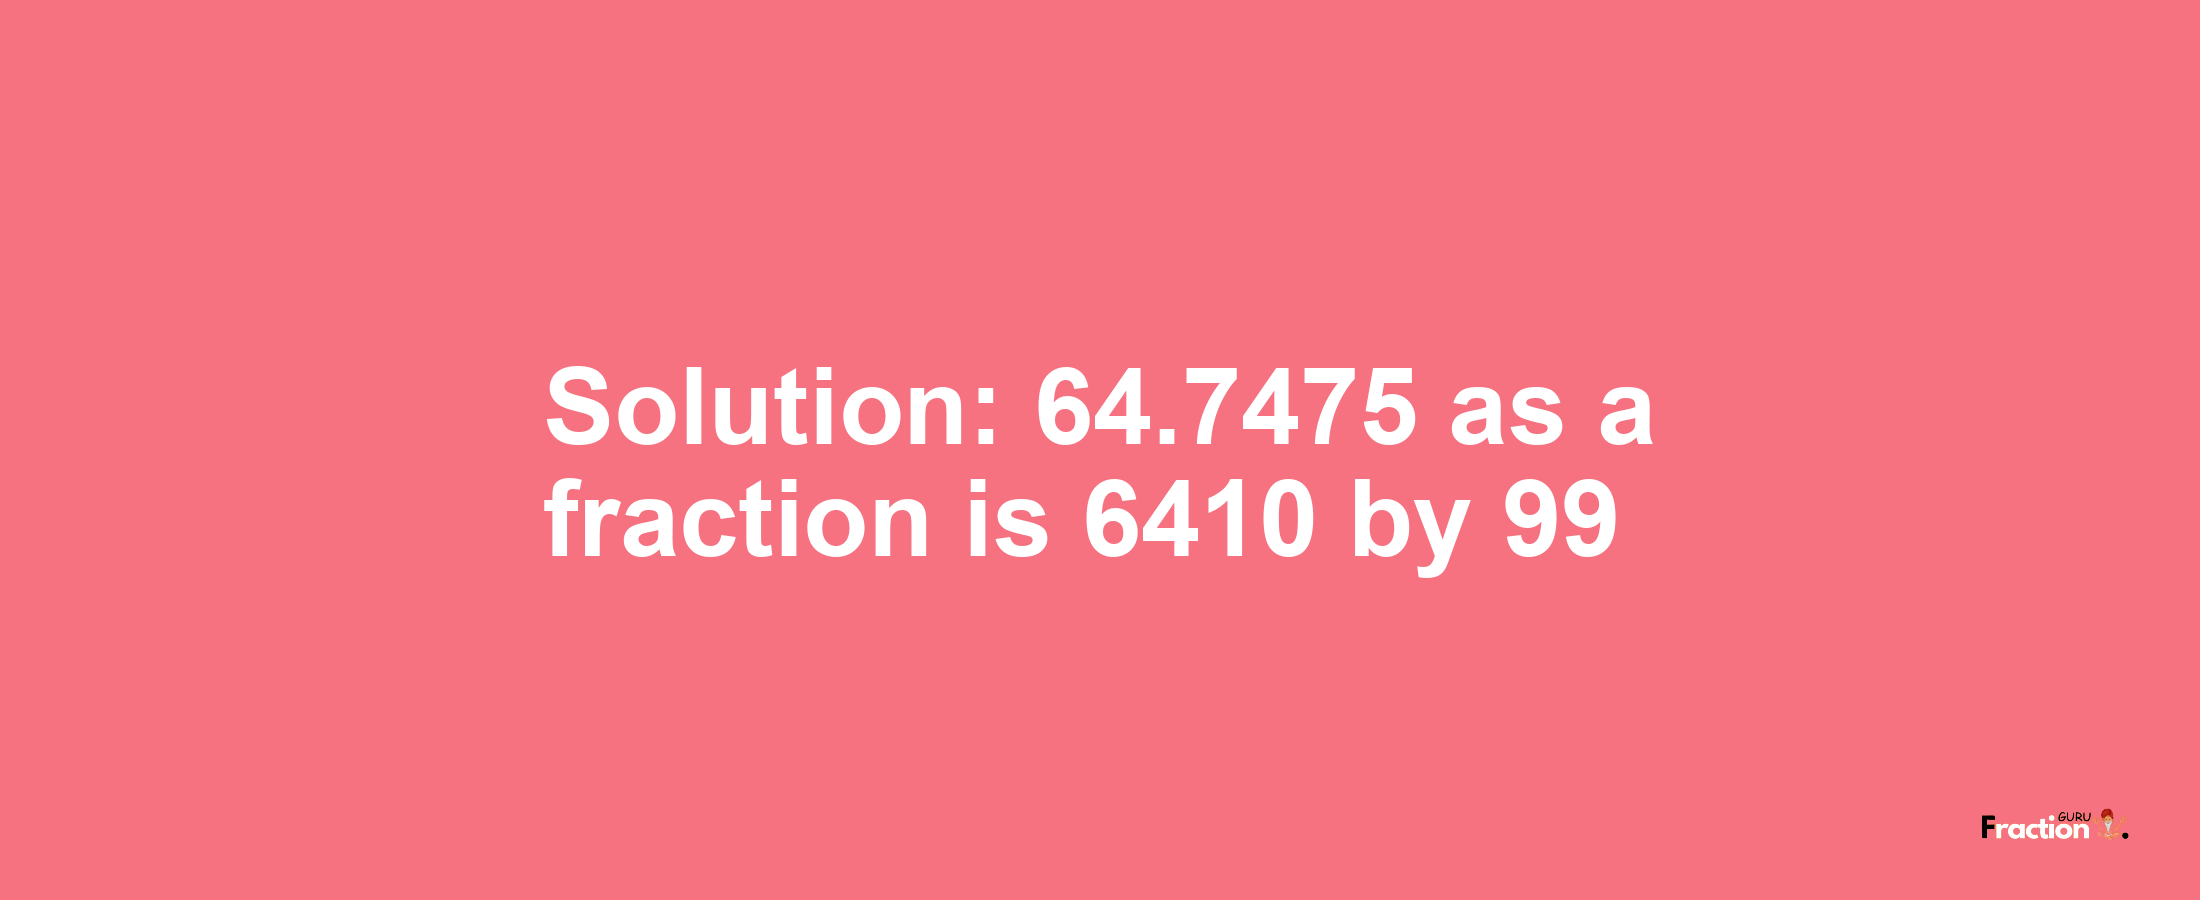 Solution:64.7475 as a fraction is 6410/99